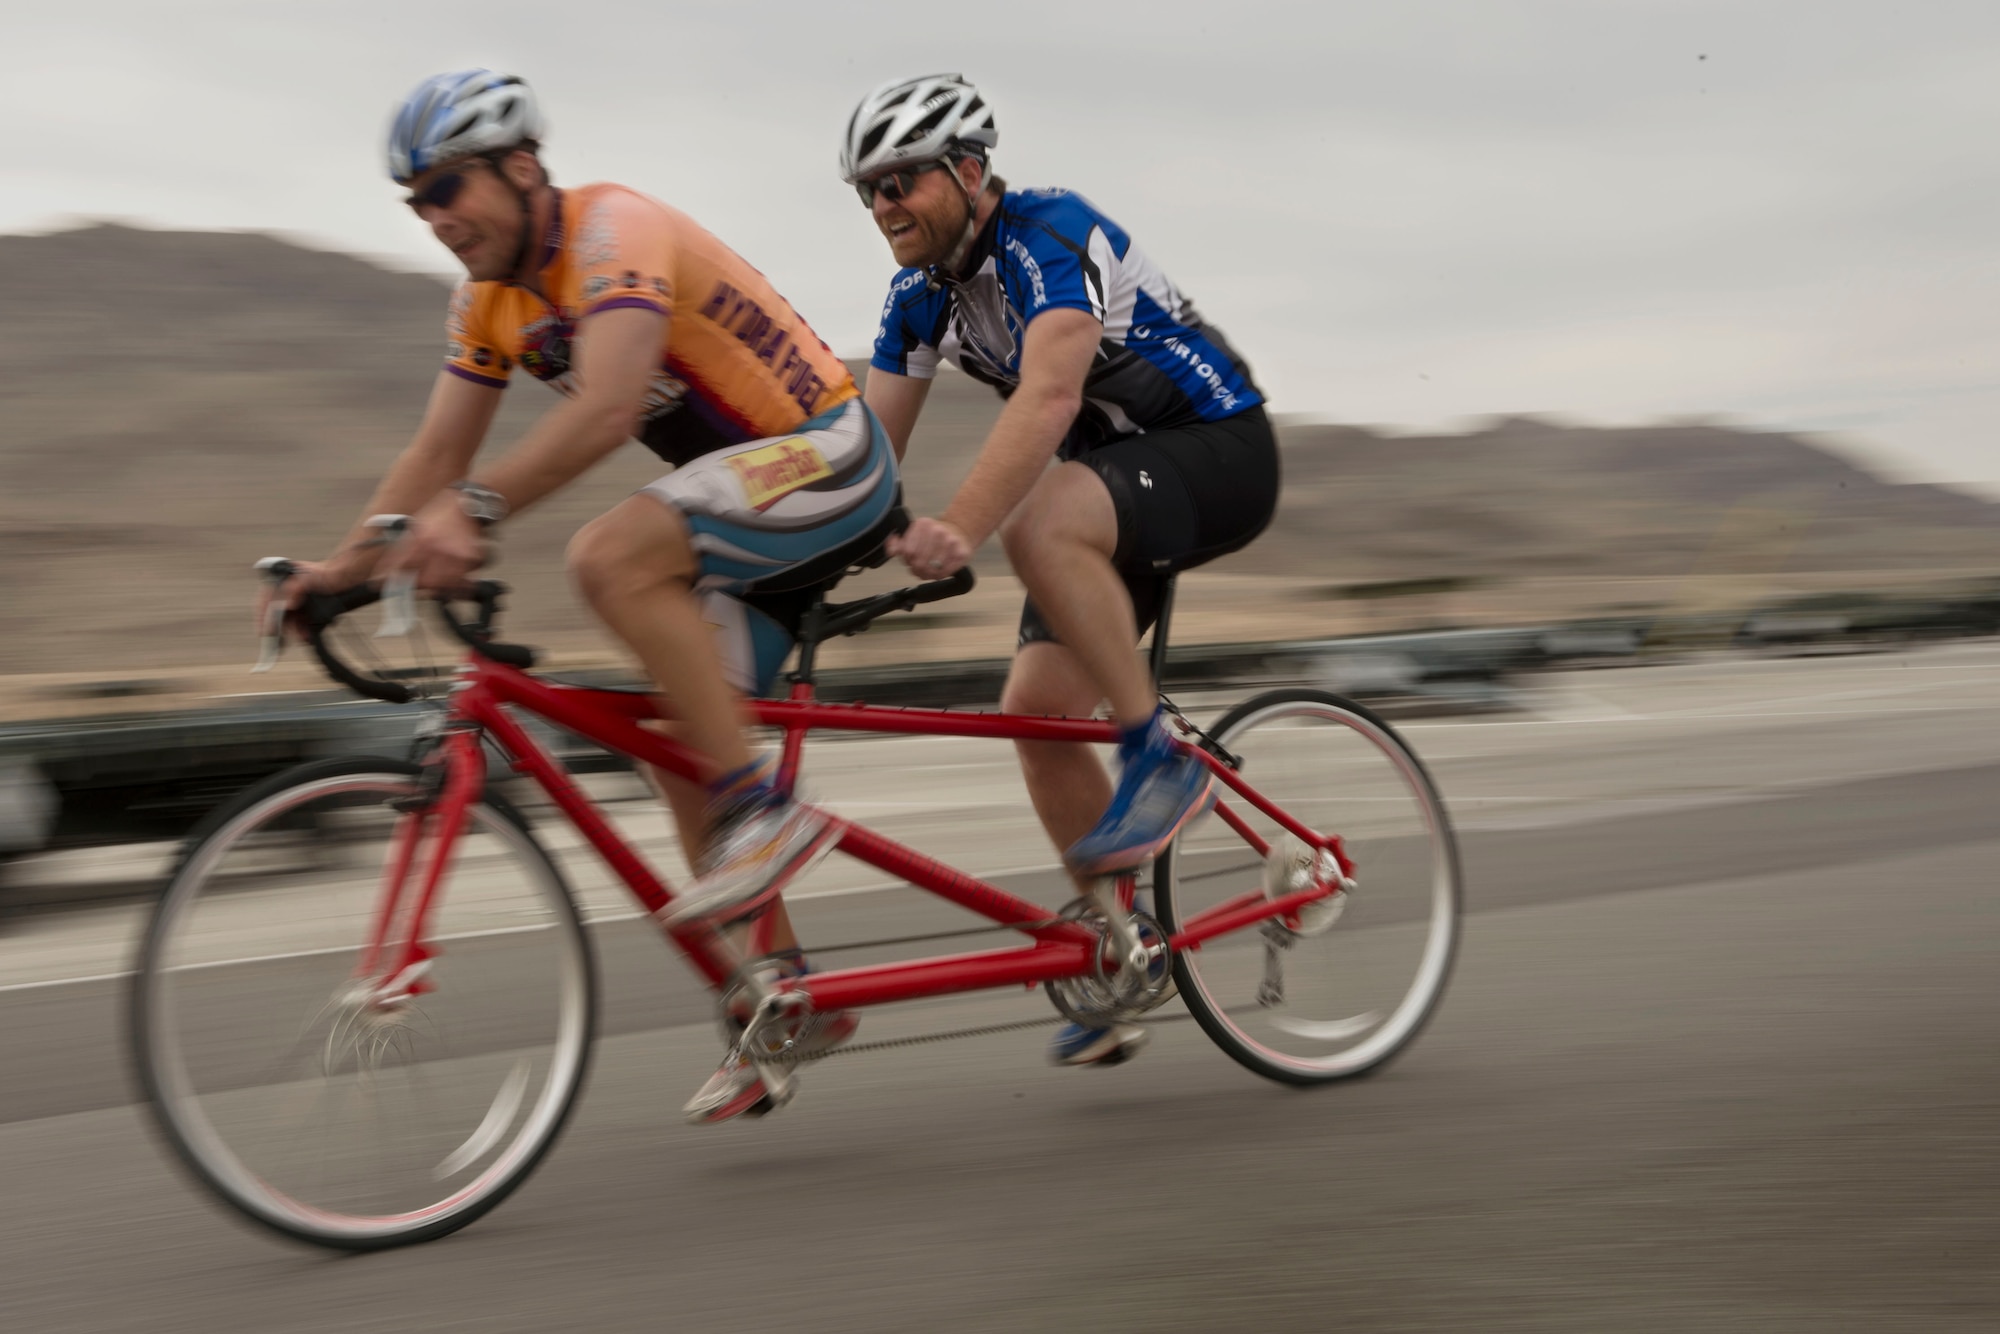 Maj. James Bales and Wes Glisson ride tandem April 9, 2014, during the cycling portion of the Air Force Trials at Nellis Air Force Base, Nev. Bales is the head coach for the Air Force team and works as a cycling pilot to help overcome Glisson’s visual impairment.  Both competed together in the tandem category during the 2013 Warrior Games and received the silver medal.  (U.S. Air Force photo/Senior Airman Jette Carr)